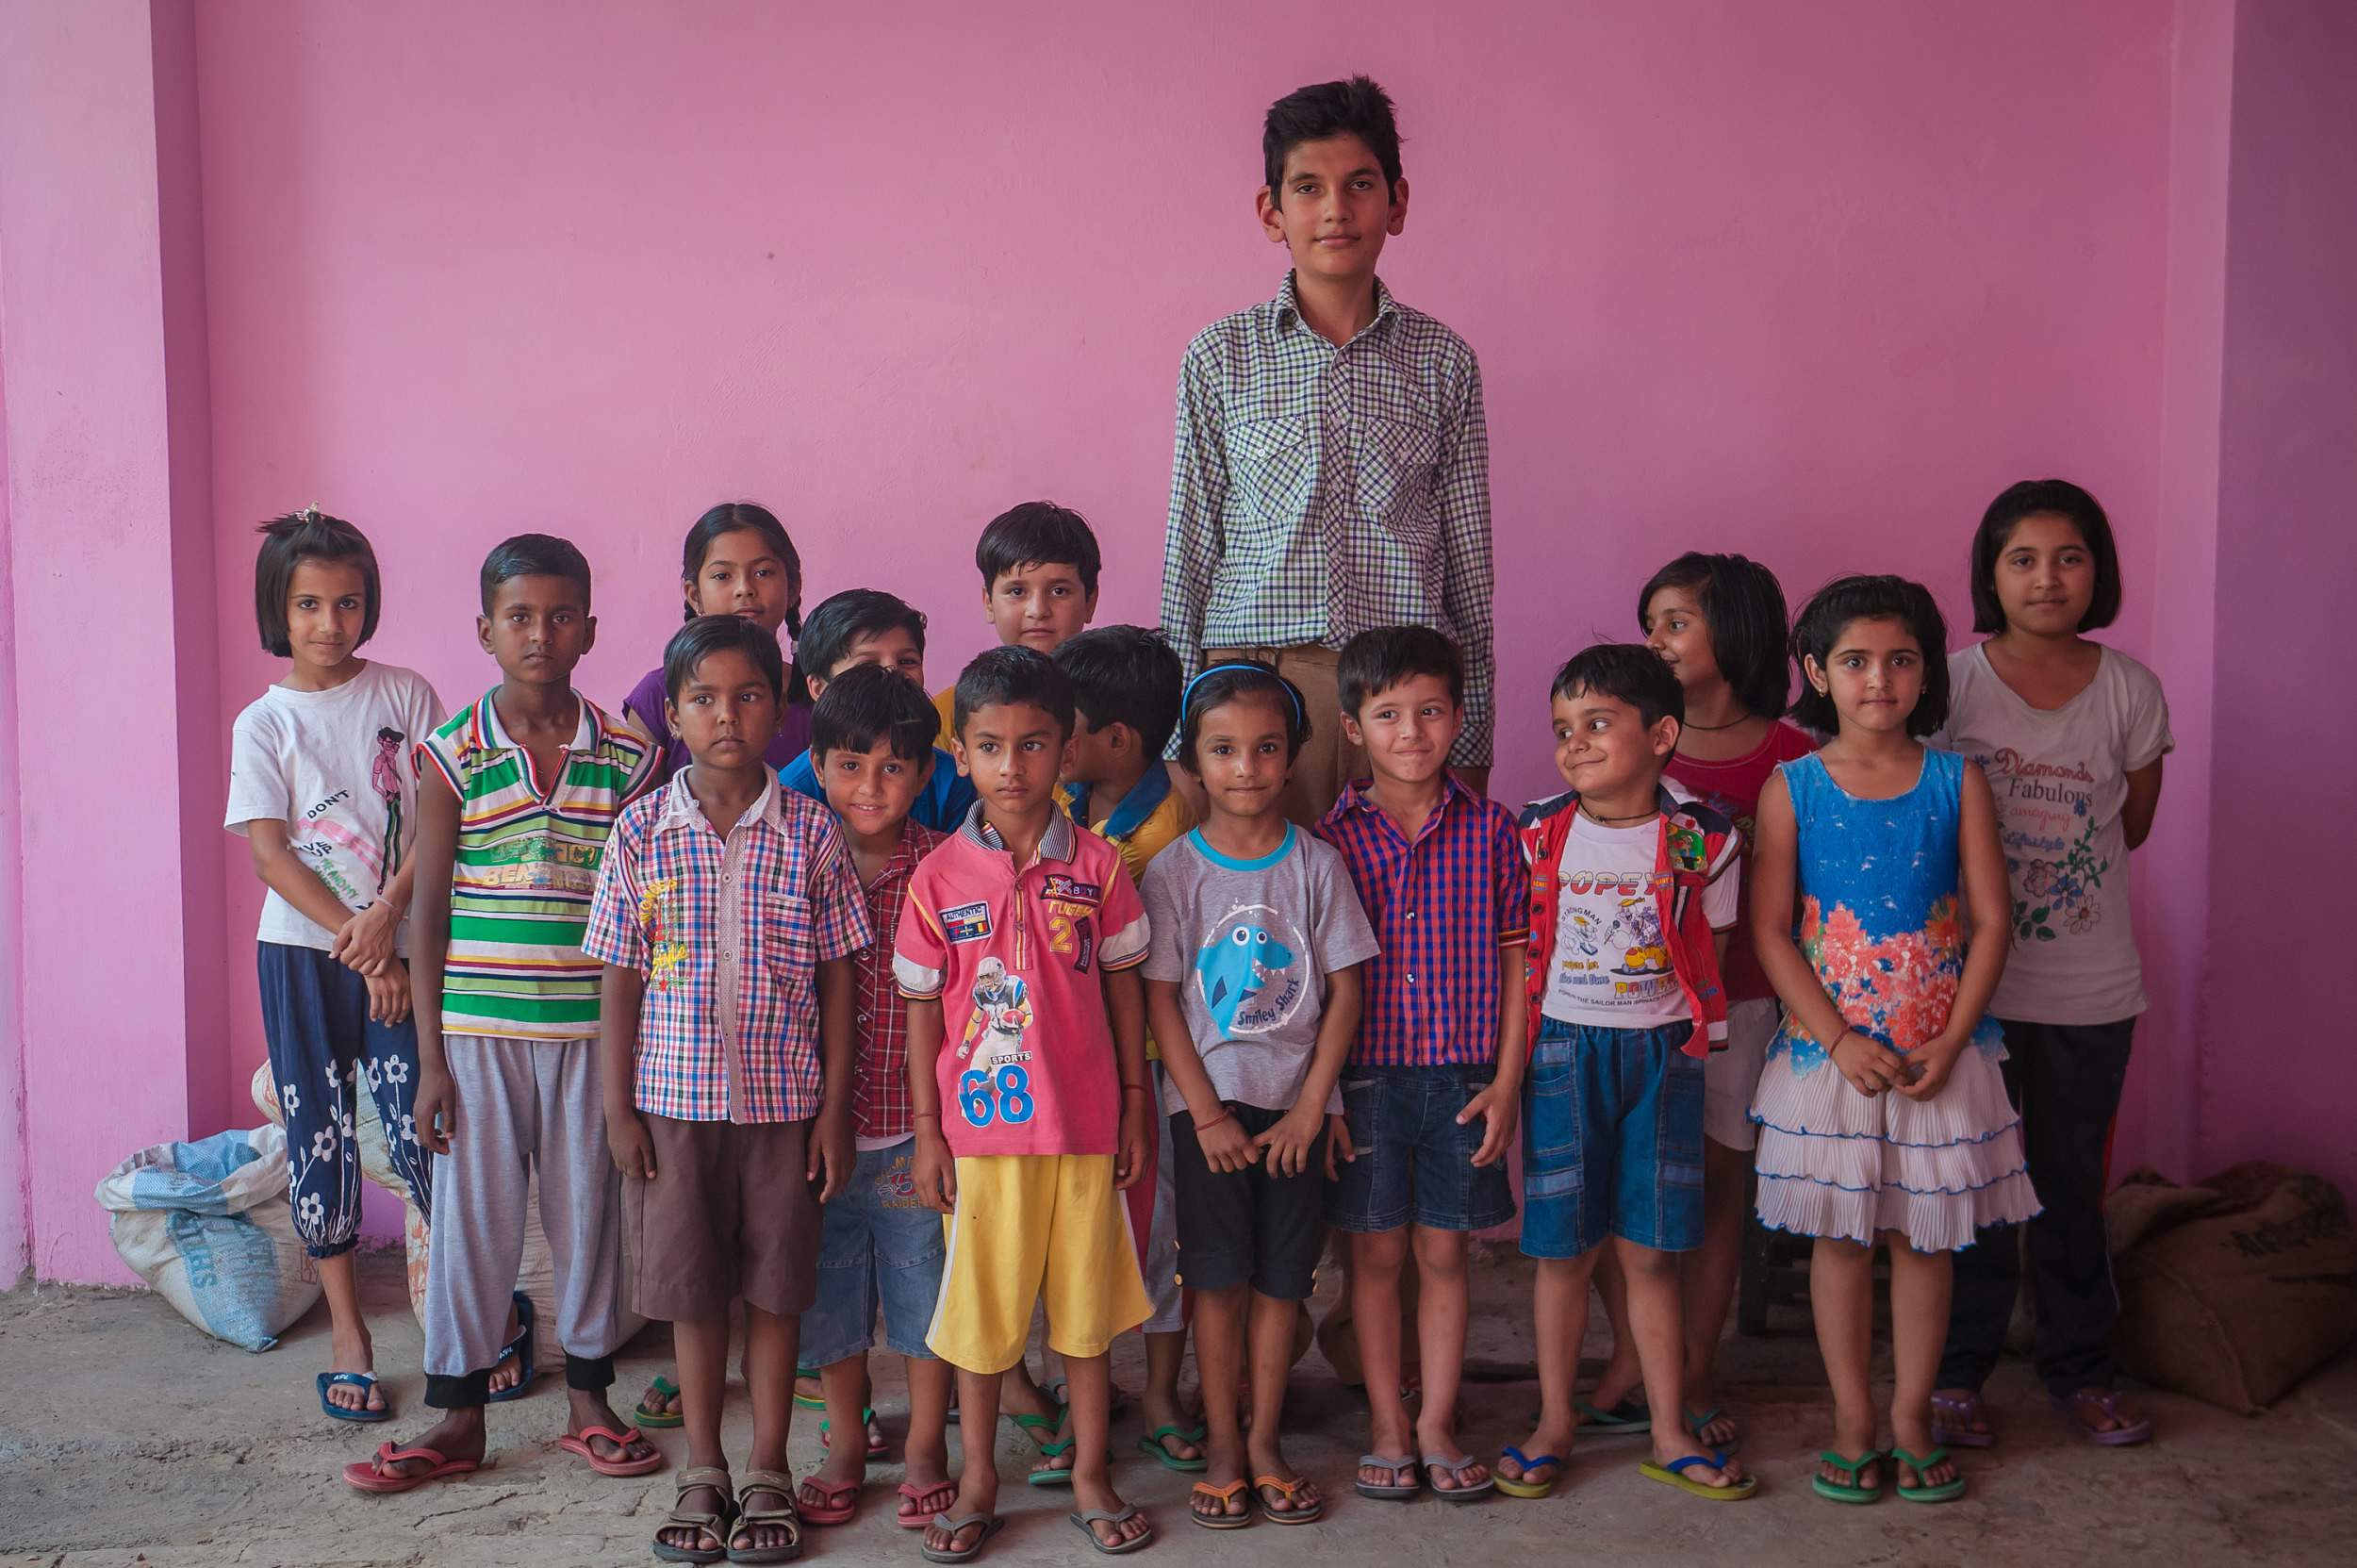 Meet the Indian boy who towers above his classmates at nearly 2